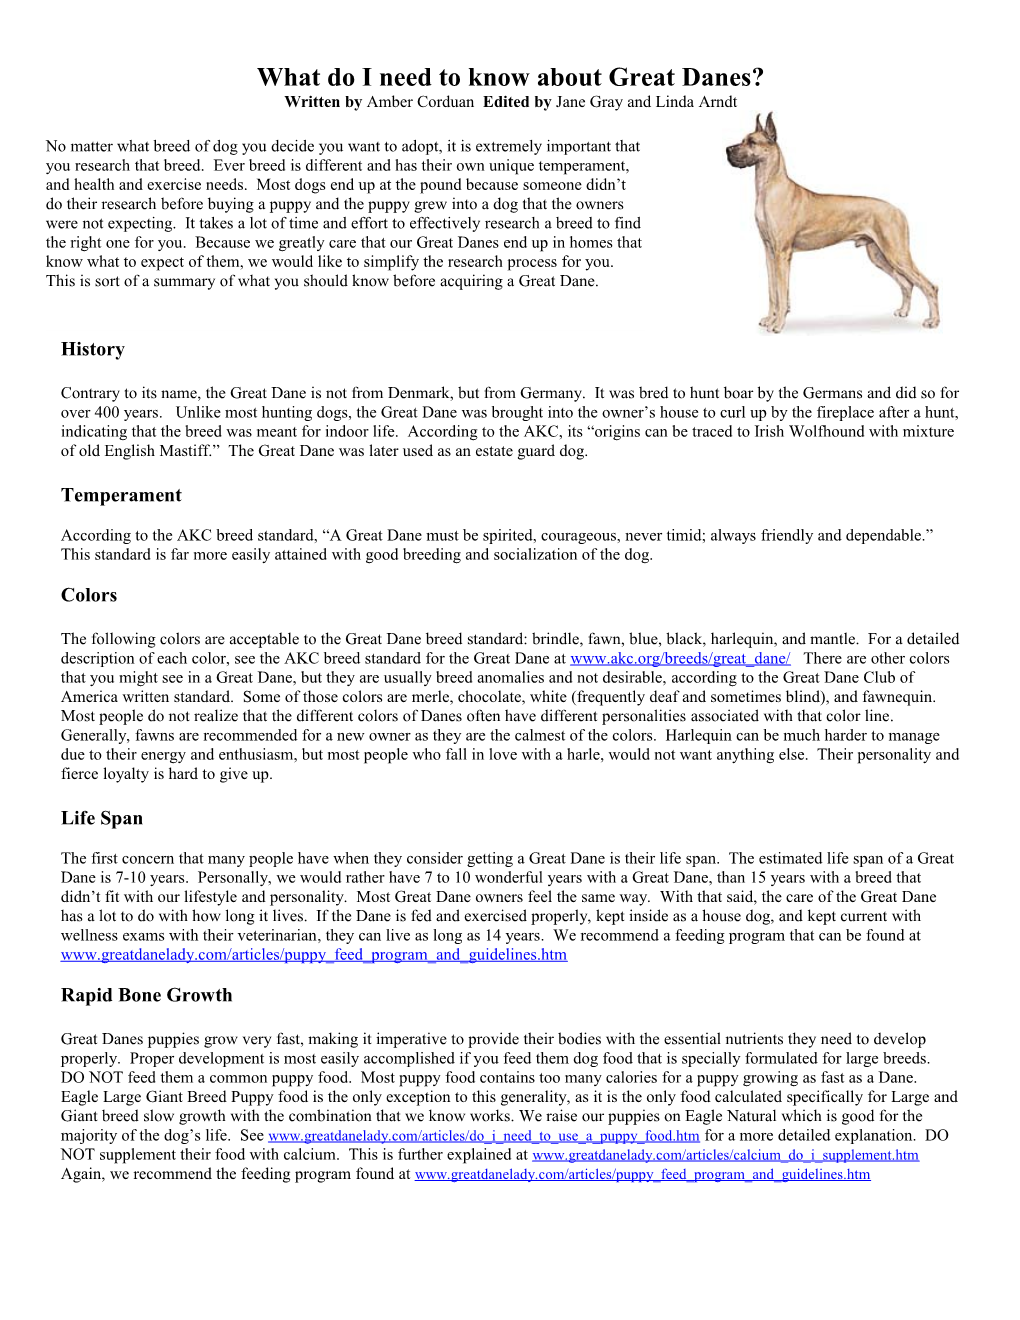 What Do I Need to Know About Great Danes?